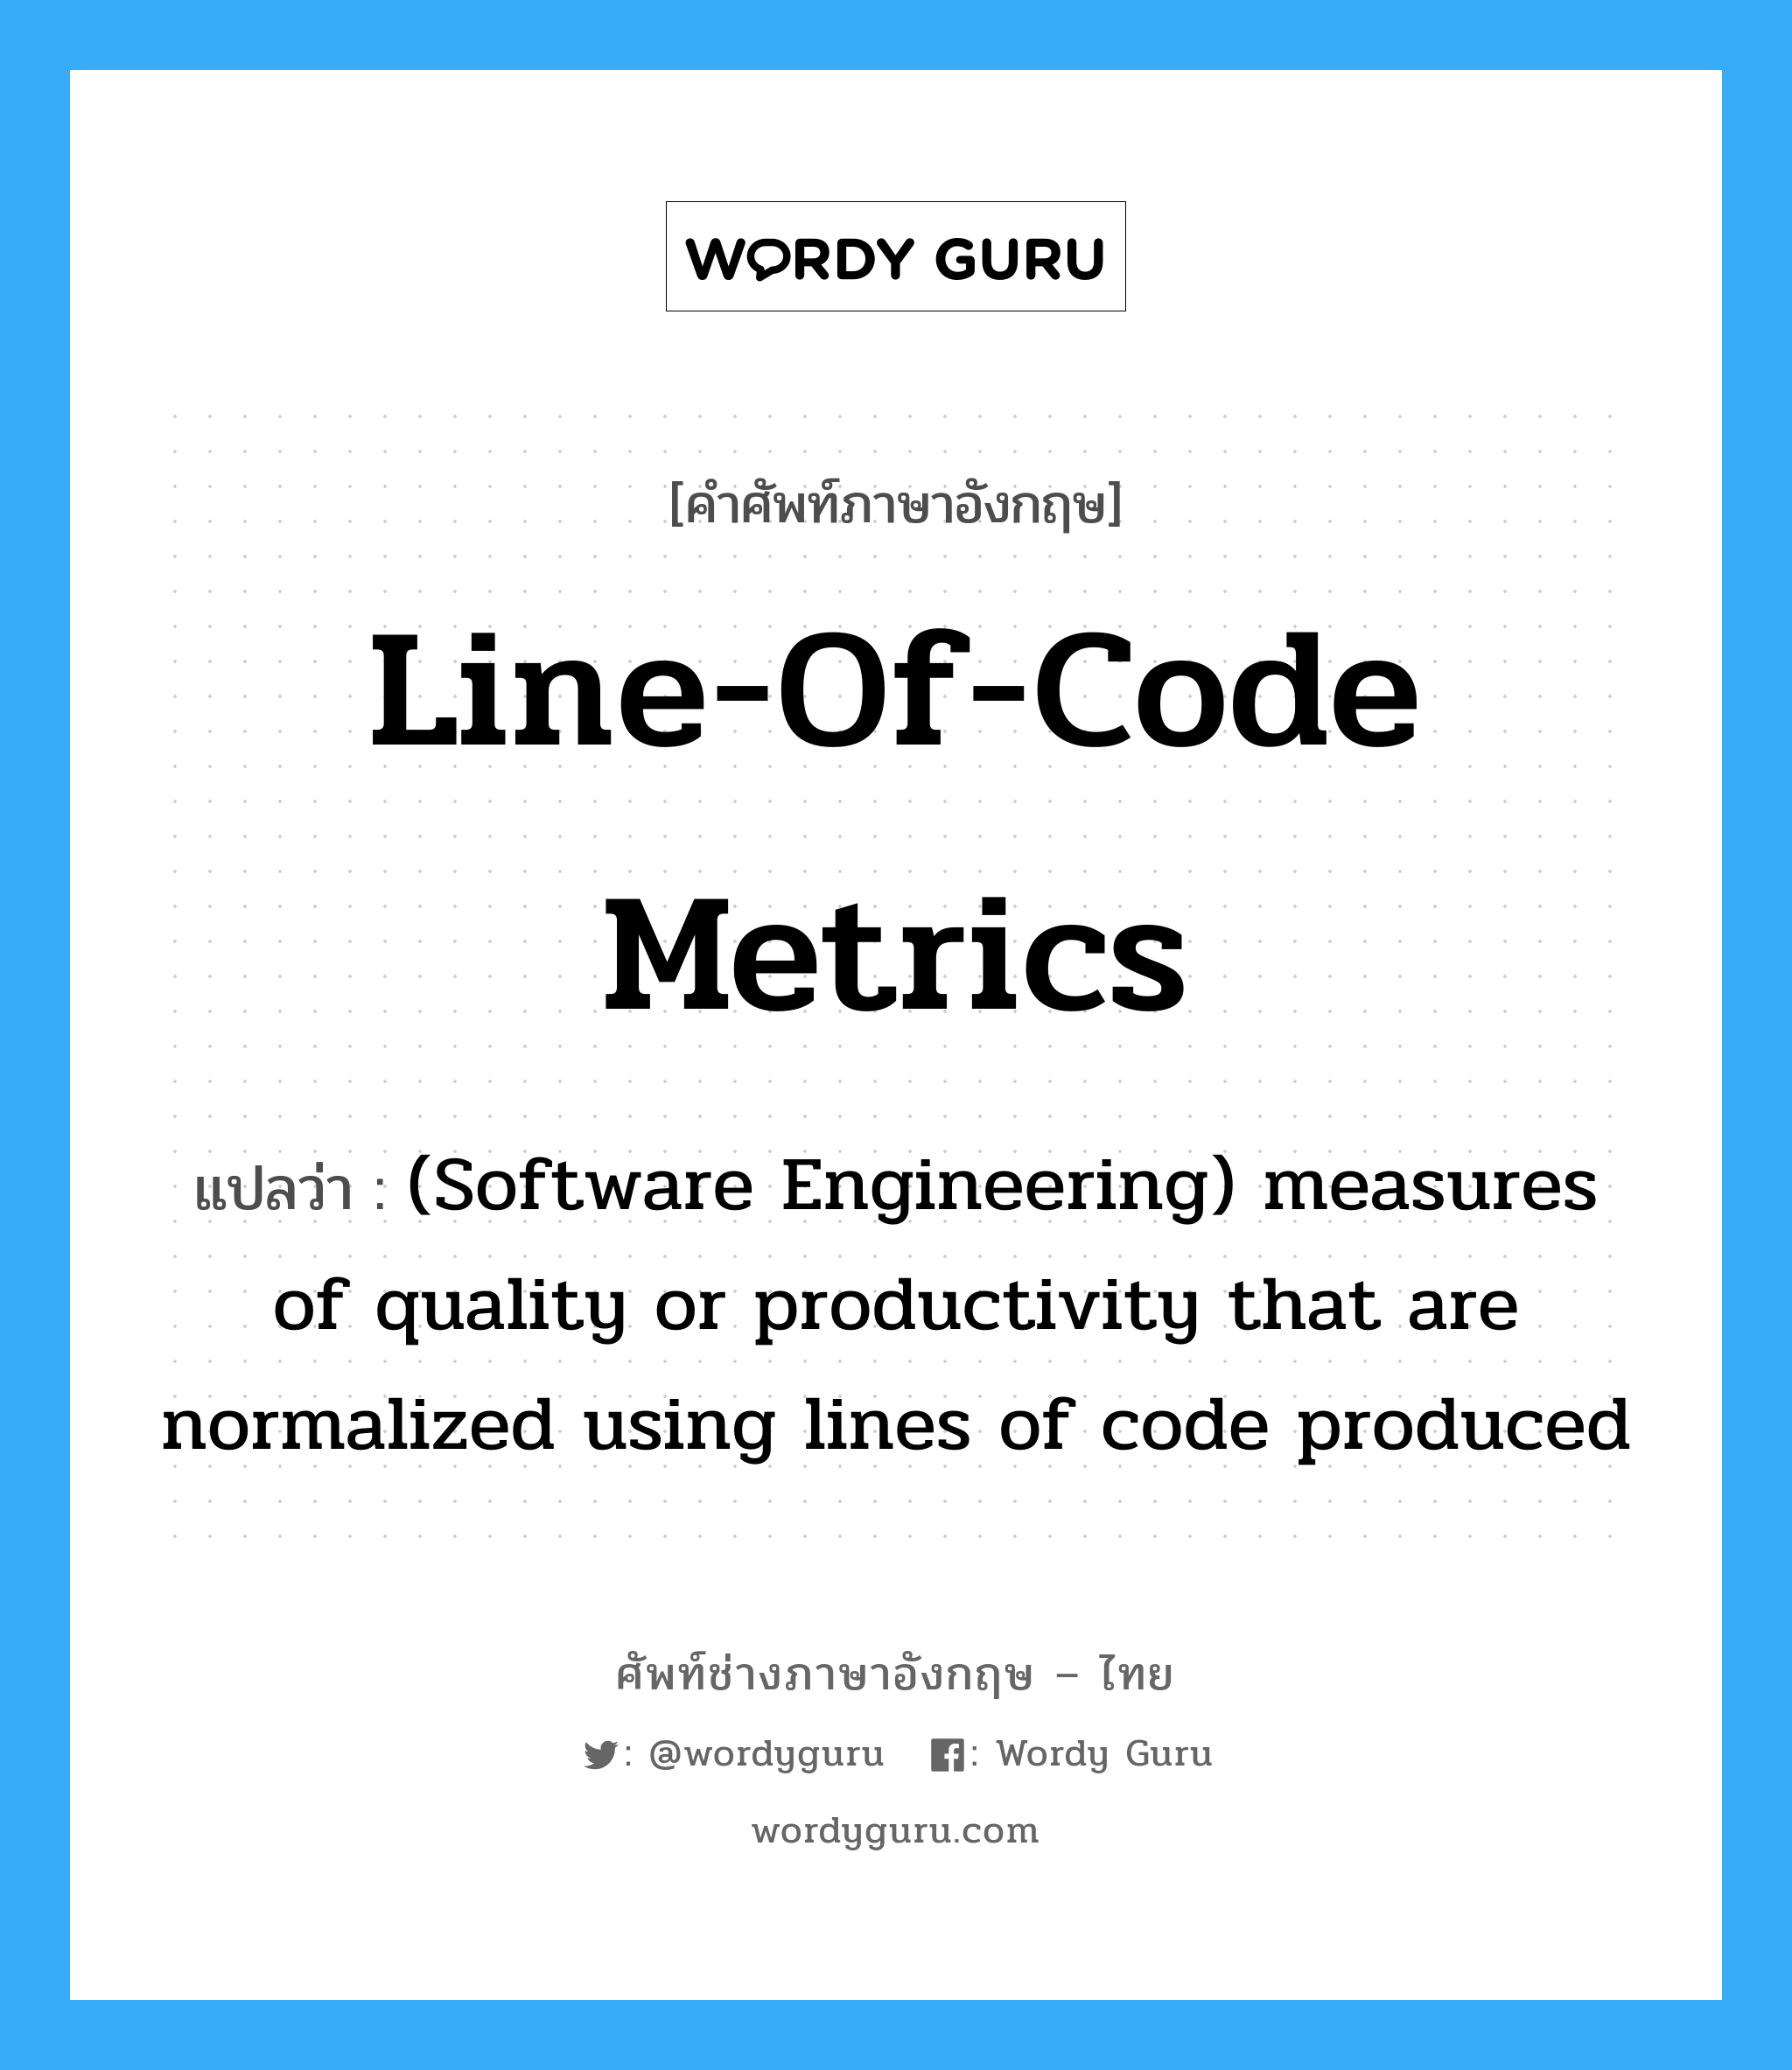 Line-of-code metrics แปลว่า?, คำศัพท์ช่างภาษาอังกฤษ - ไทย Line-of-code metrics คำศัพท์ภาษาอังกฤษ Line-of-code metrics แปลว่า (Software Engineering) measures of quality or productivity that are normalized using lines of code produced